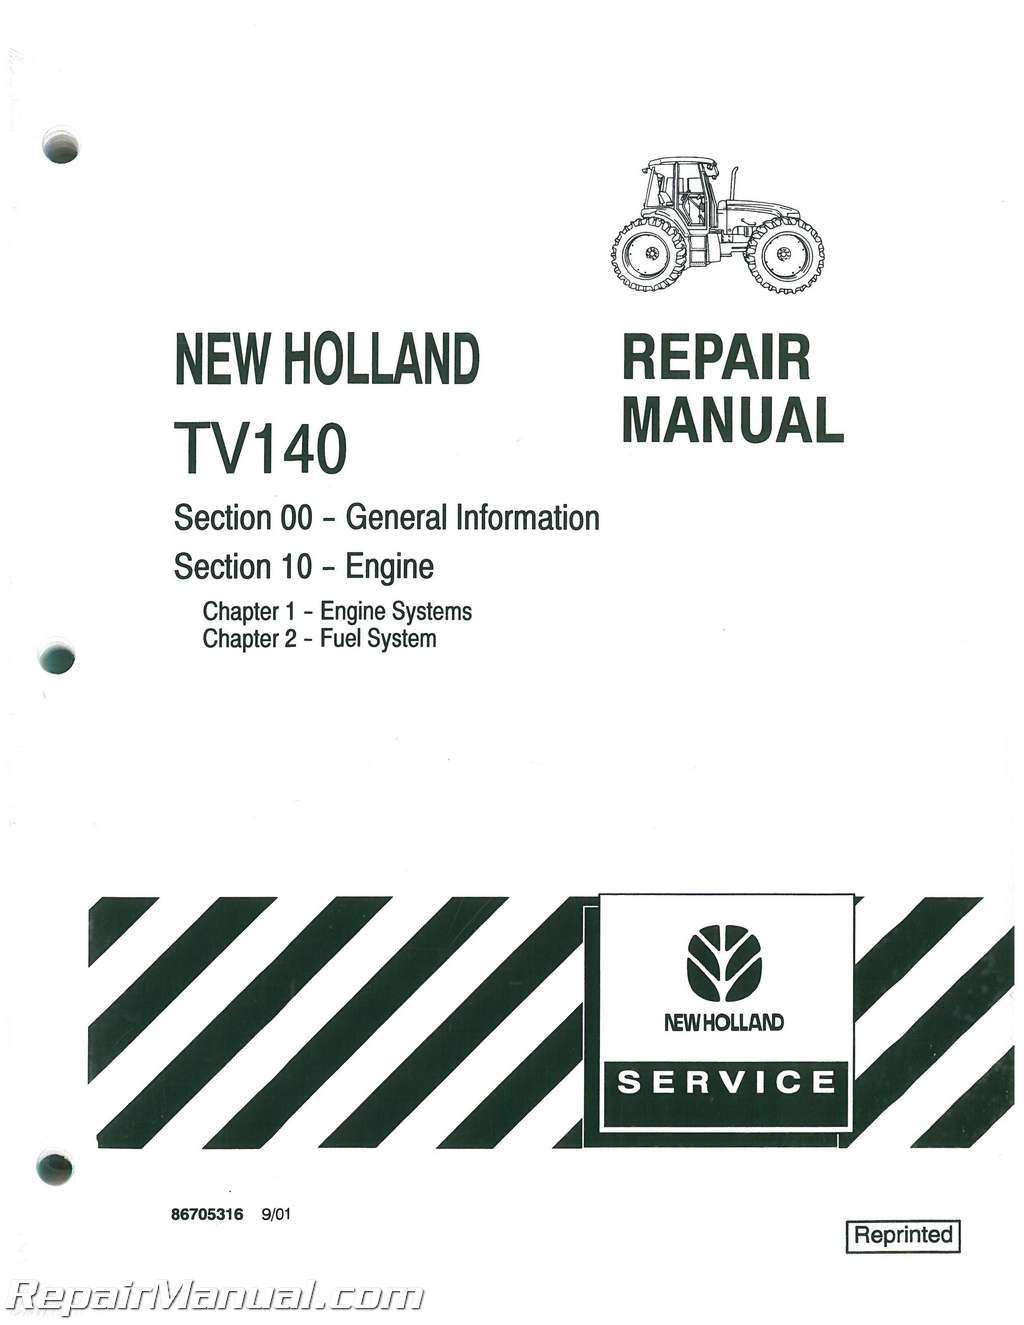 Ford new holland service manual